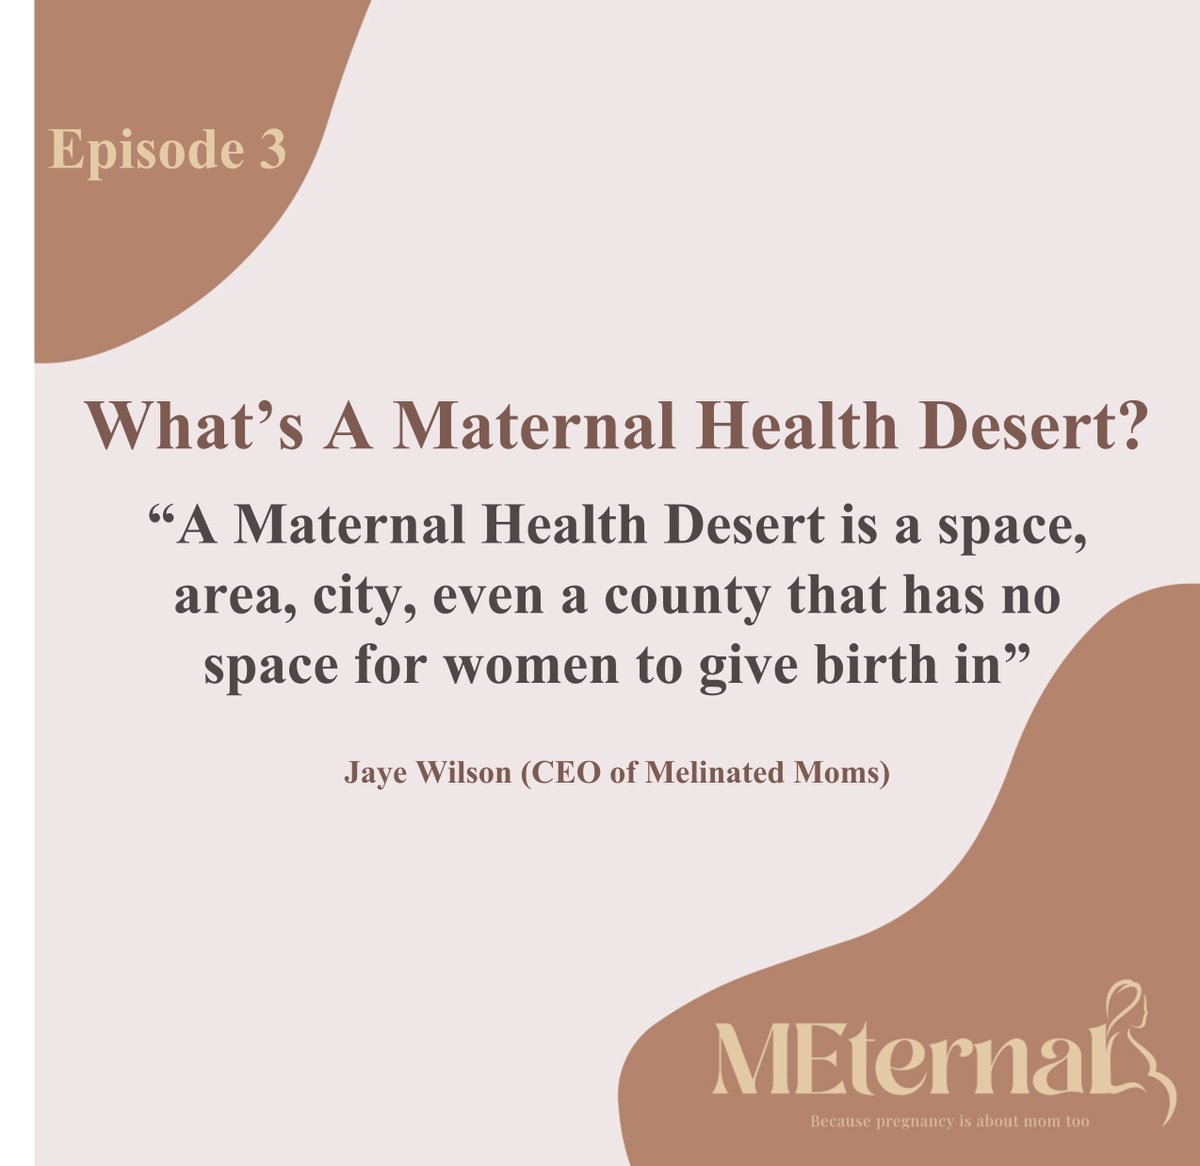 Have you listened to the latest episode of the #MEternal podcast? 🤱🏽🤲🏾 If not, go check it out at MEternal.info 🩺🤰🏿❤️‍🩹 #MEternal in partnership with @MetroPlusHealth & @Thinx